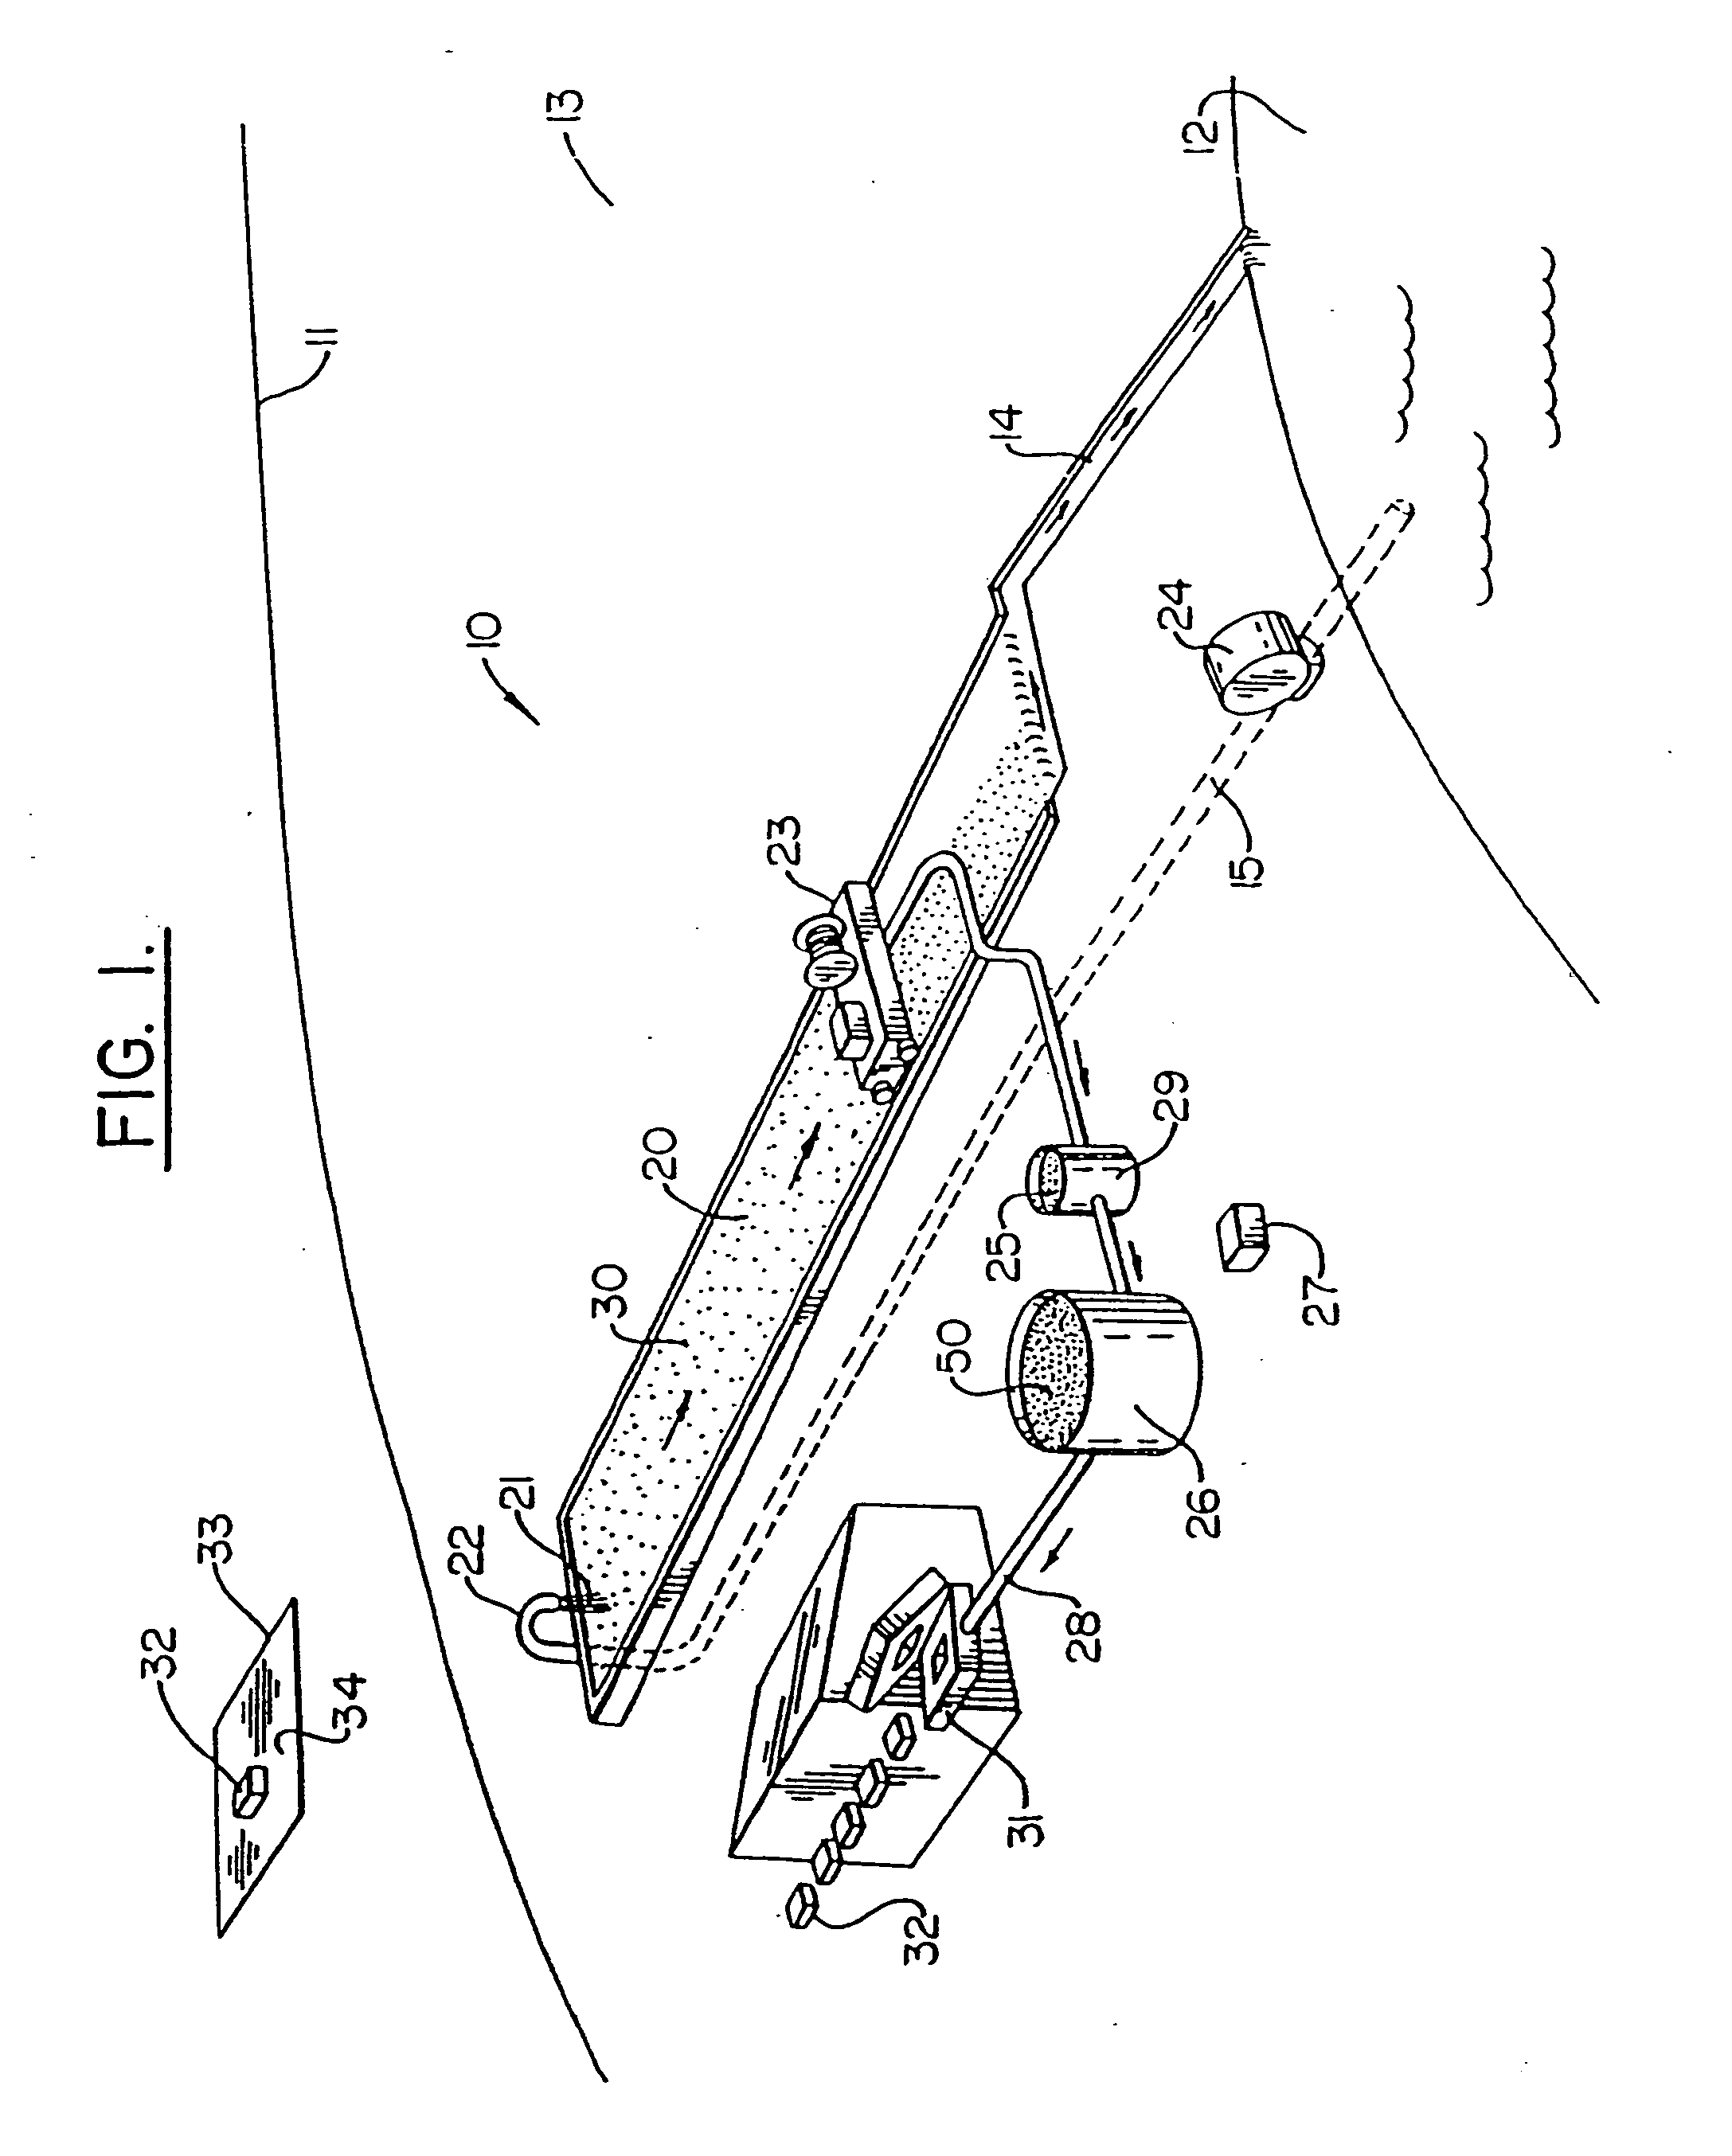 Integrated system and method for purifying water, producing pulp and paper, and improving soil quality